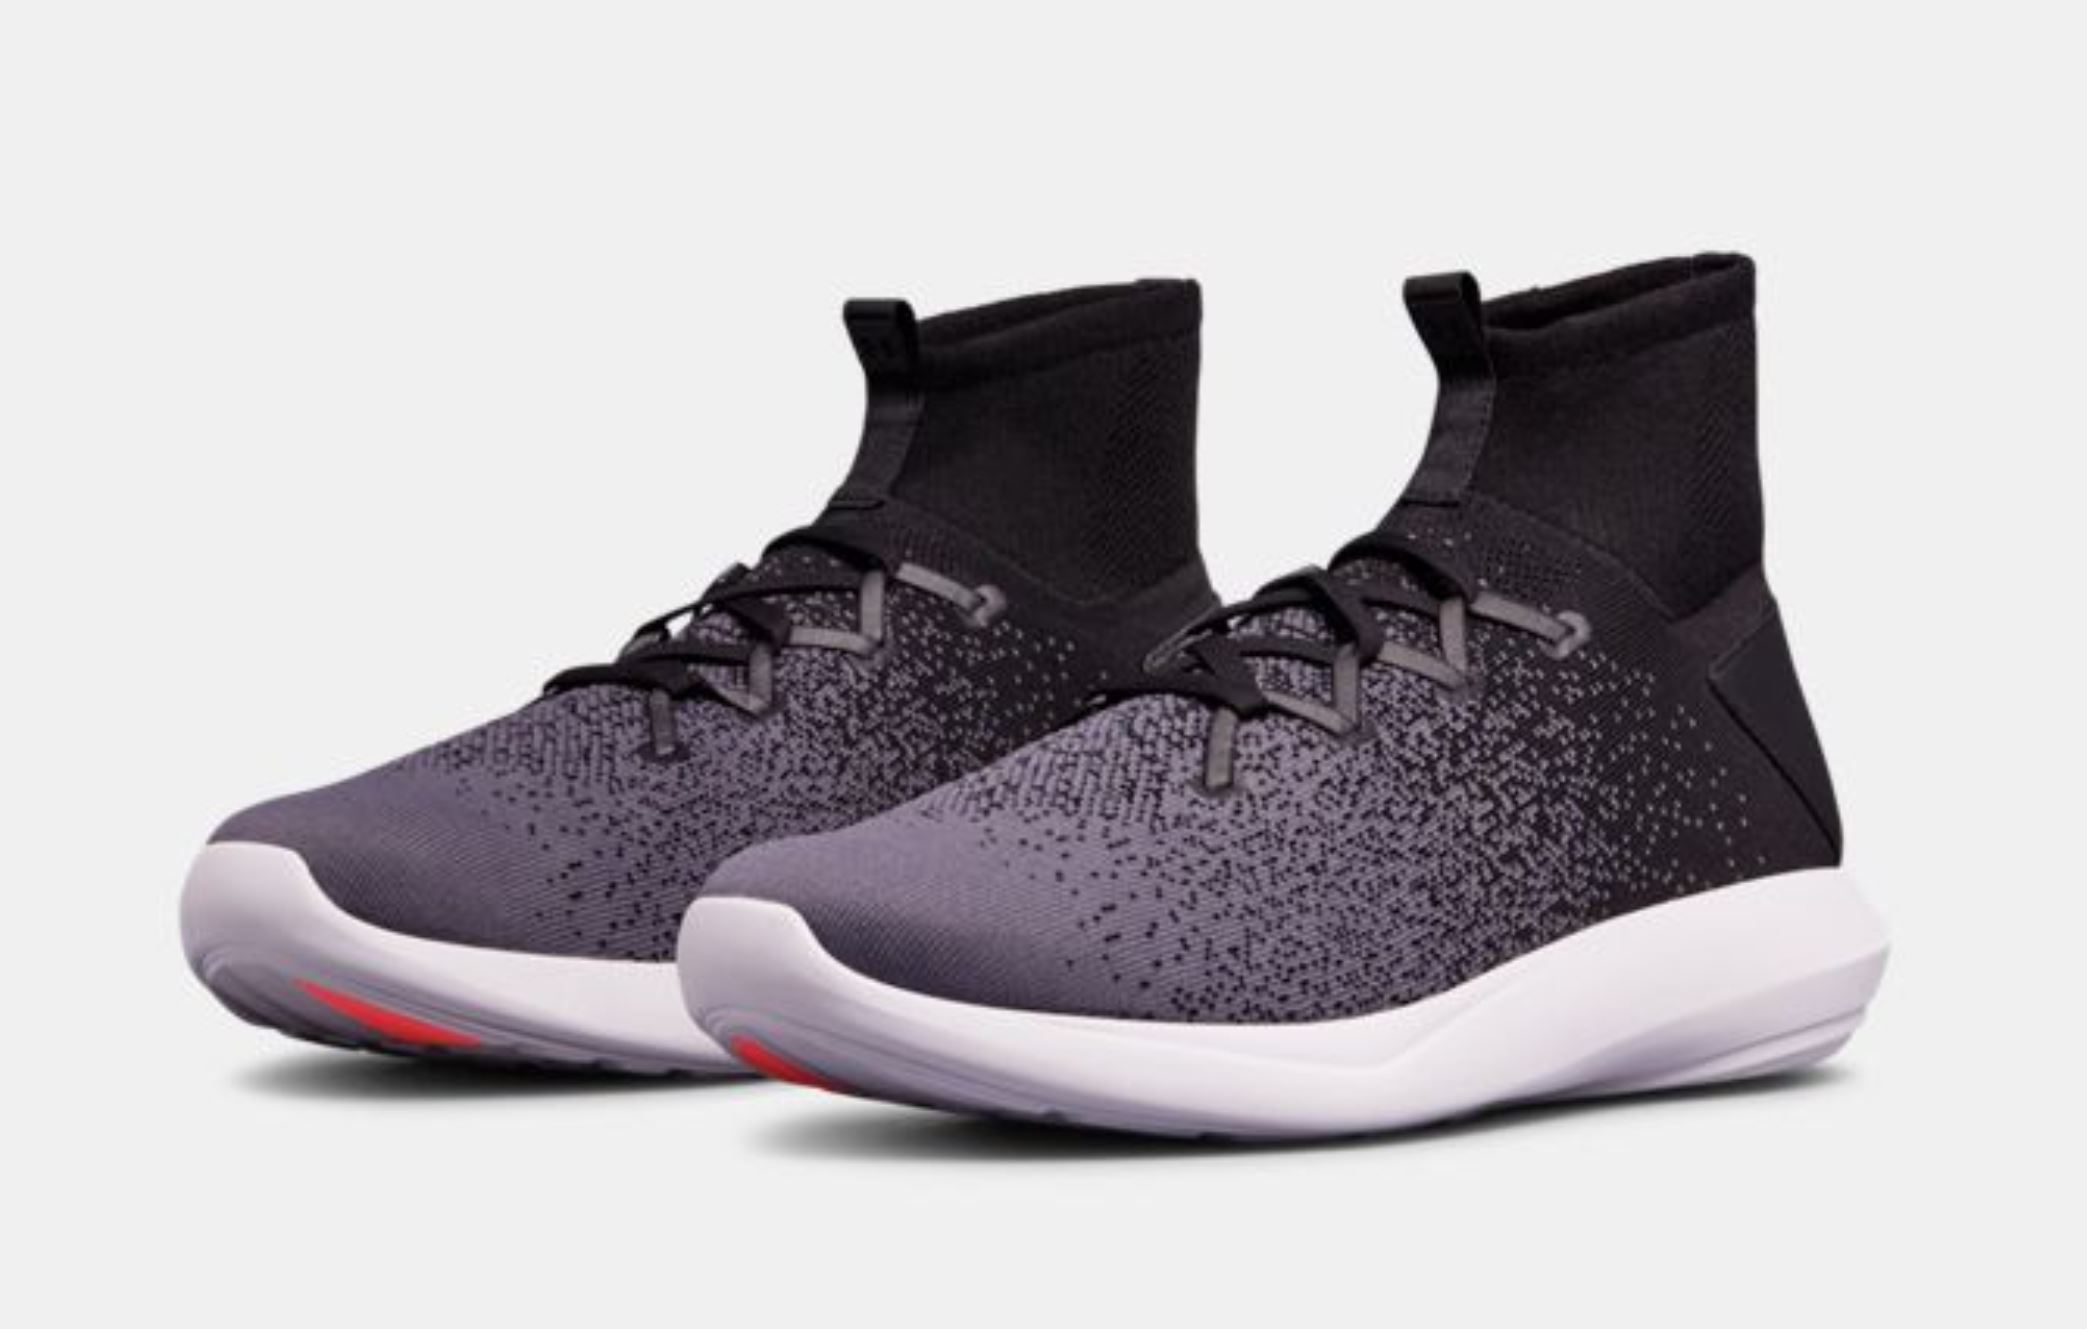 Under Armour Introduces the Charged 